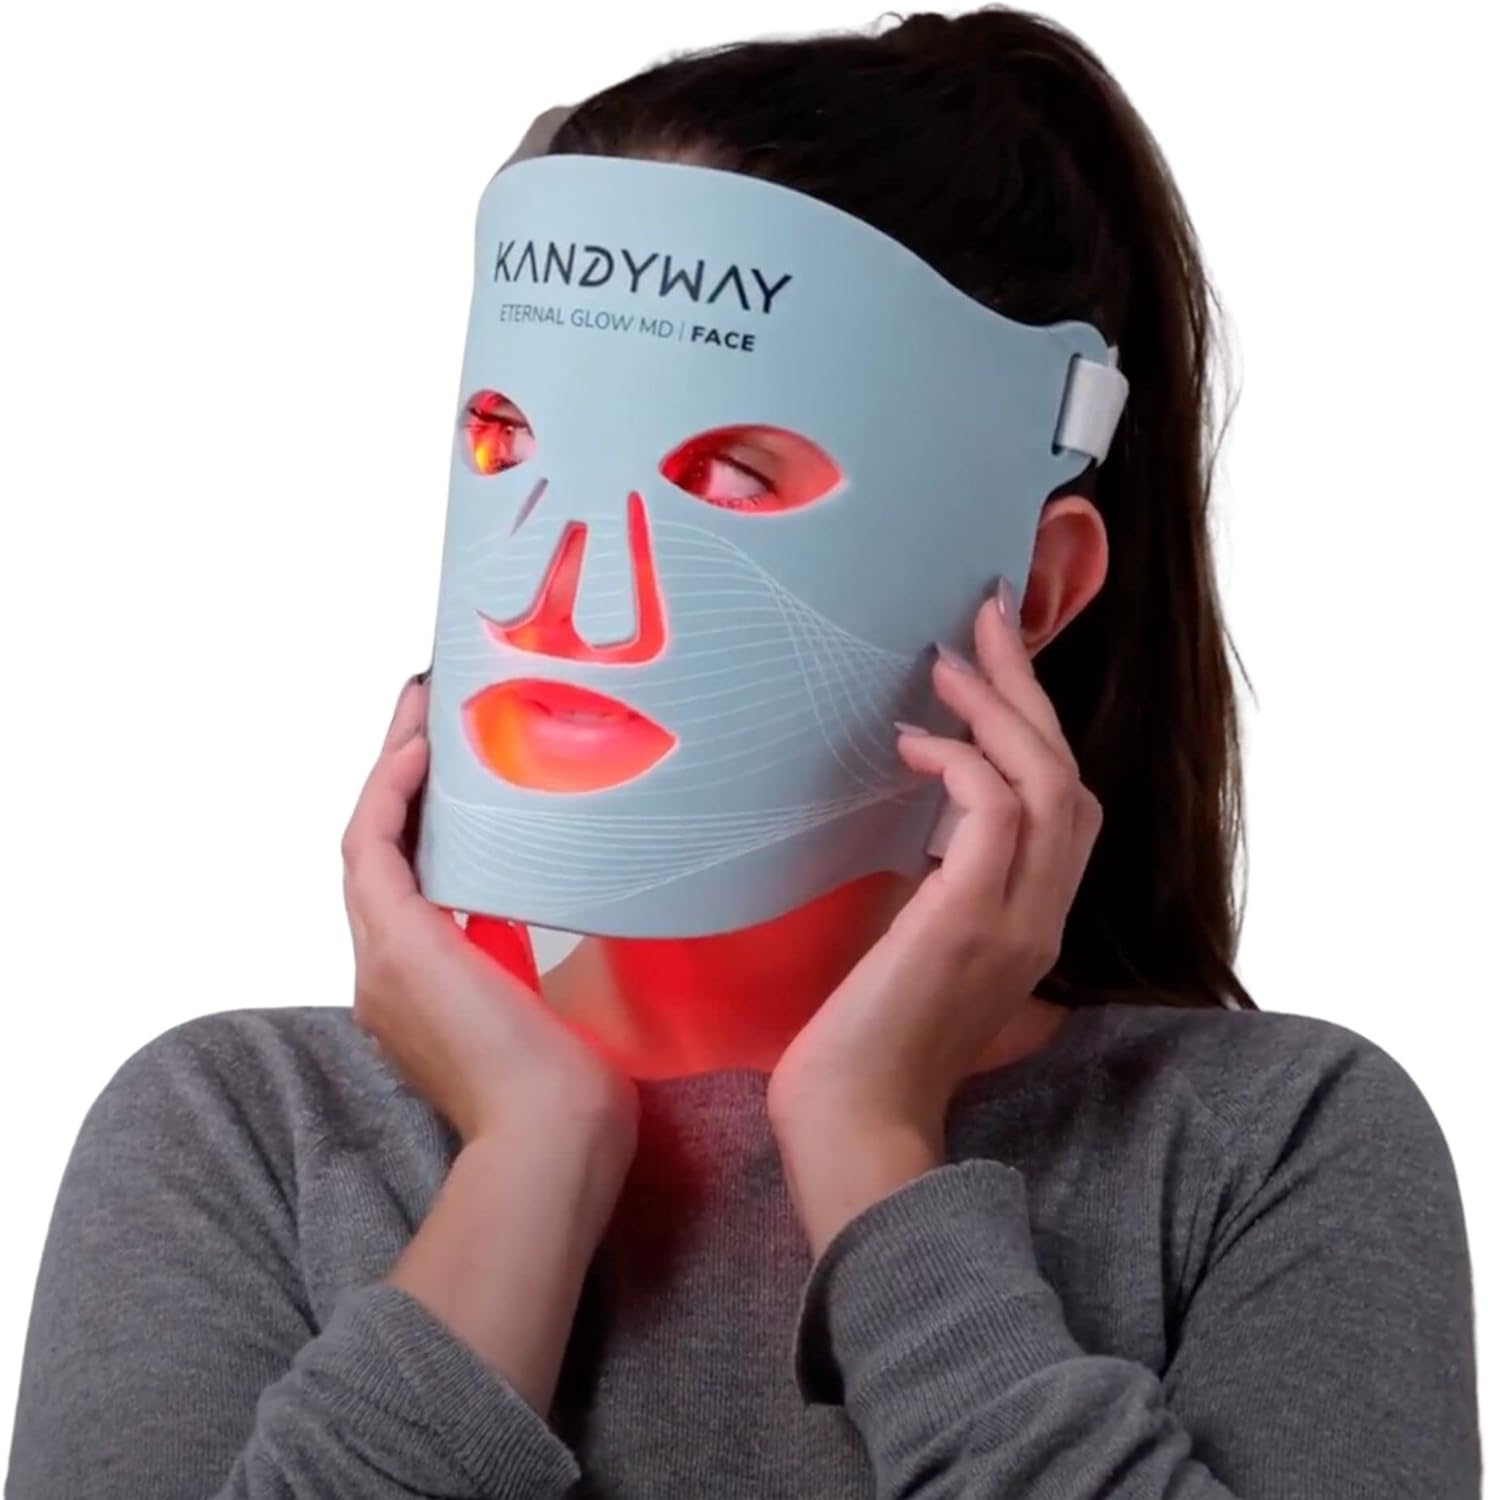 Red Light Therapy Mask - FDA Cleared, Medical Grade, Red Light Therapy for Face, Reduces Wrinkles, Scarring, Redenss, Improves Skin Tone, Speeds Up Wound Healing